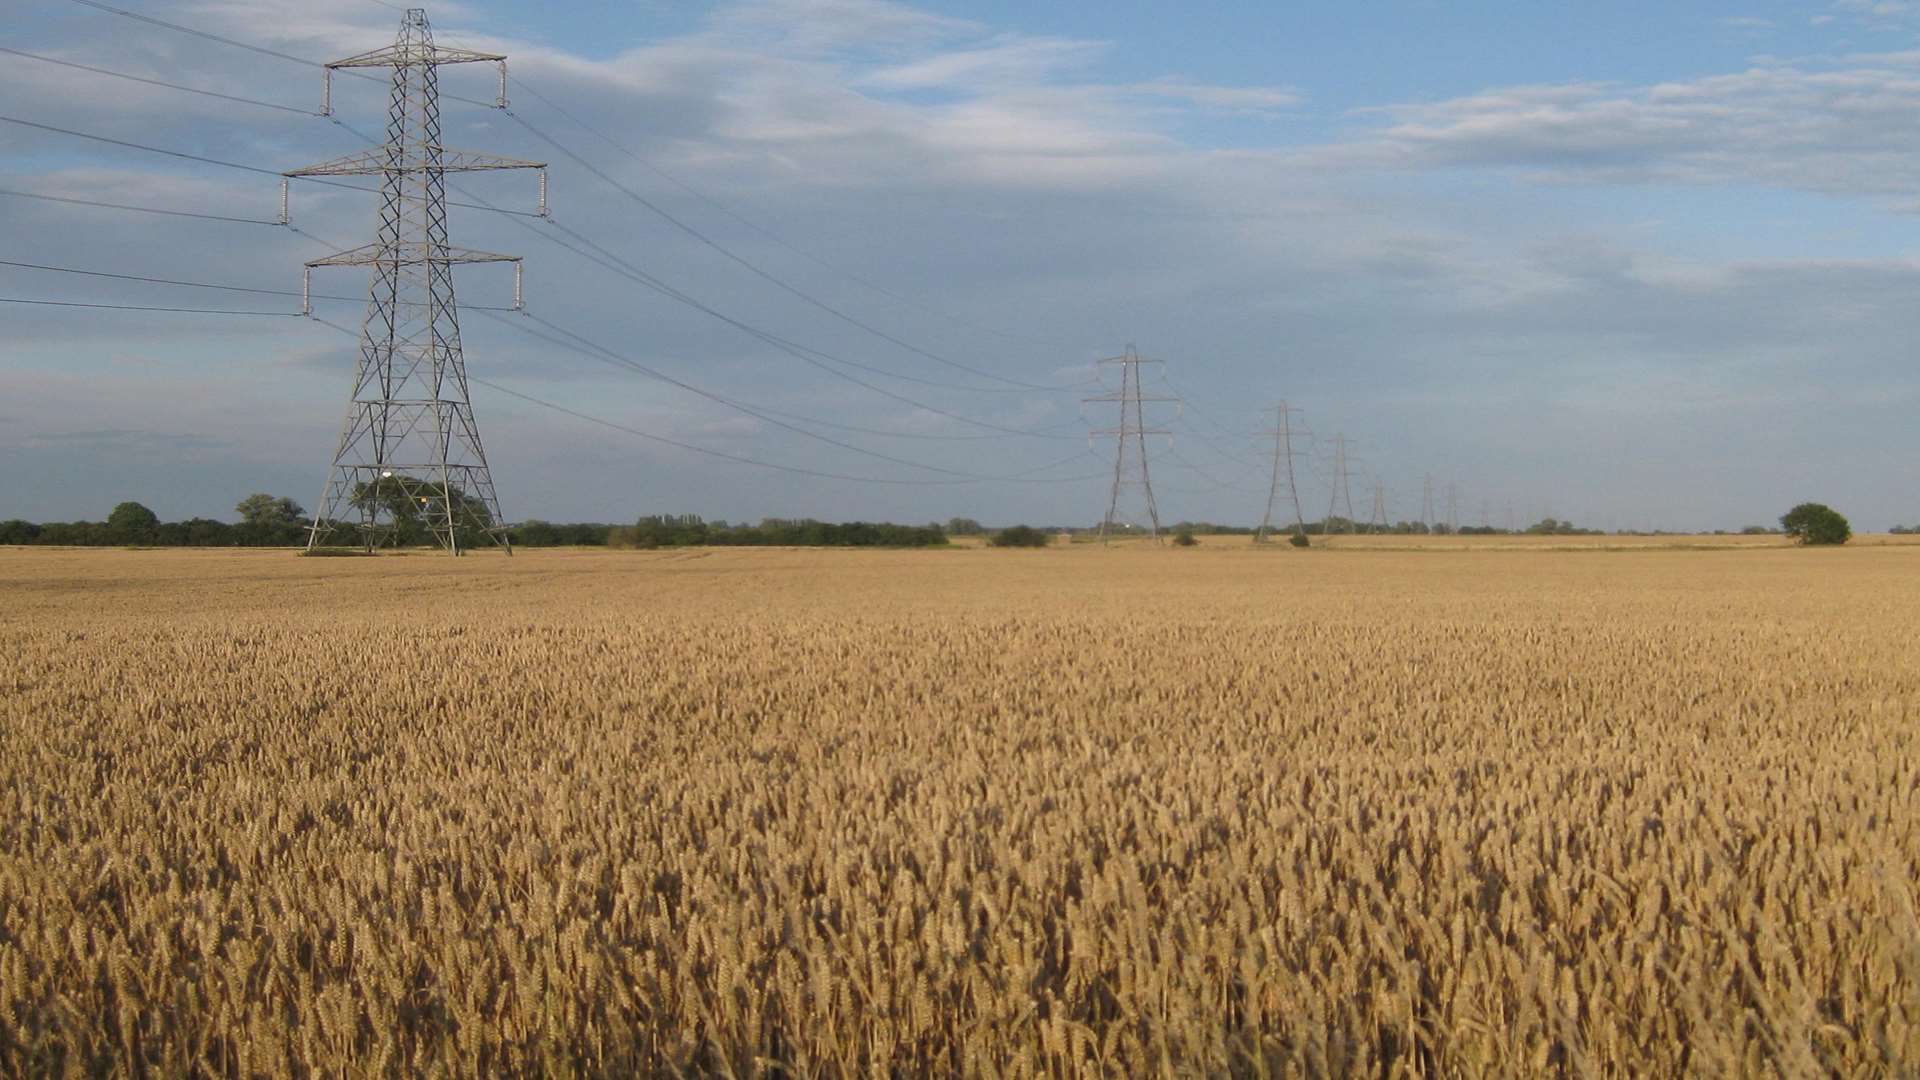 The standard pylon that will be used in the Richborough Connection project